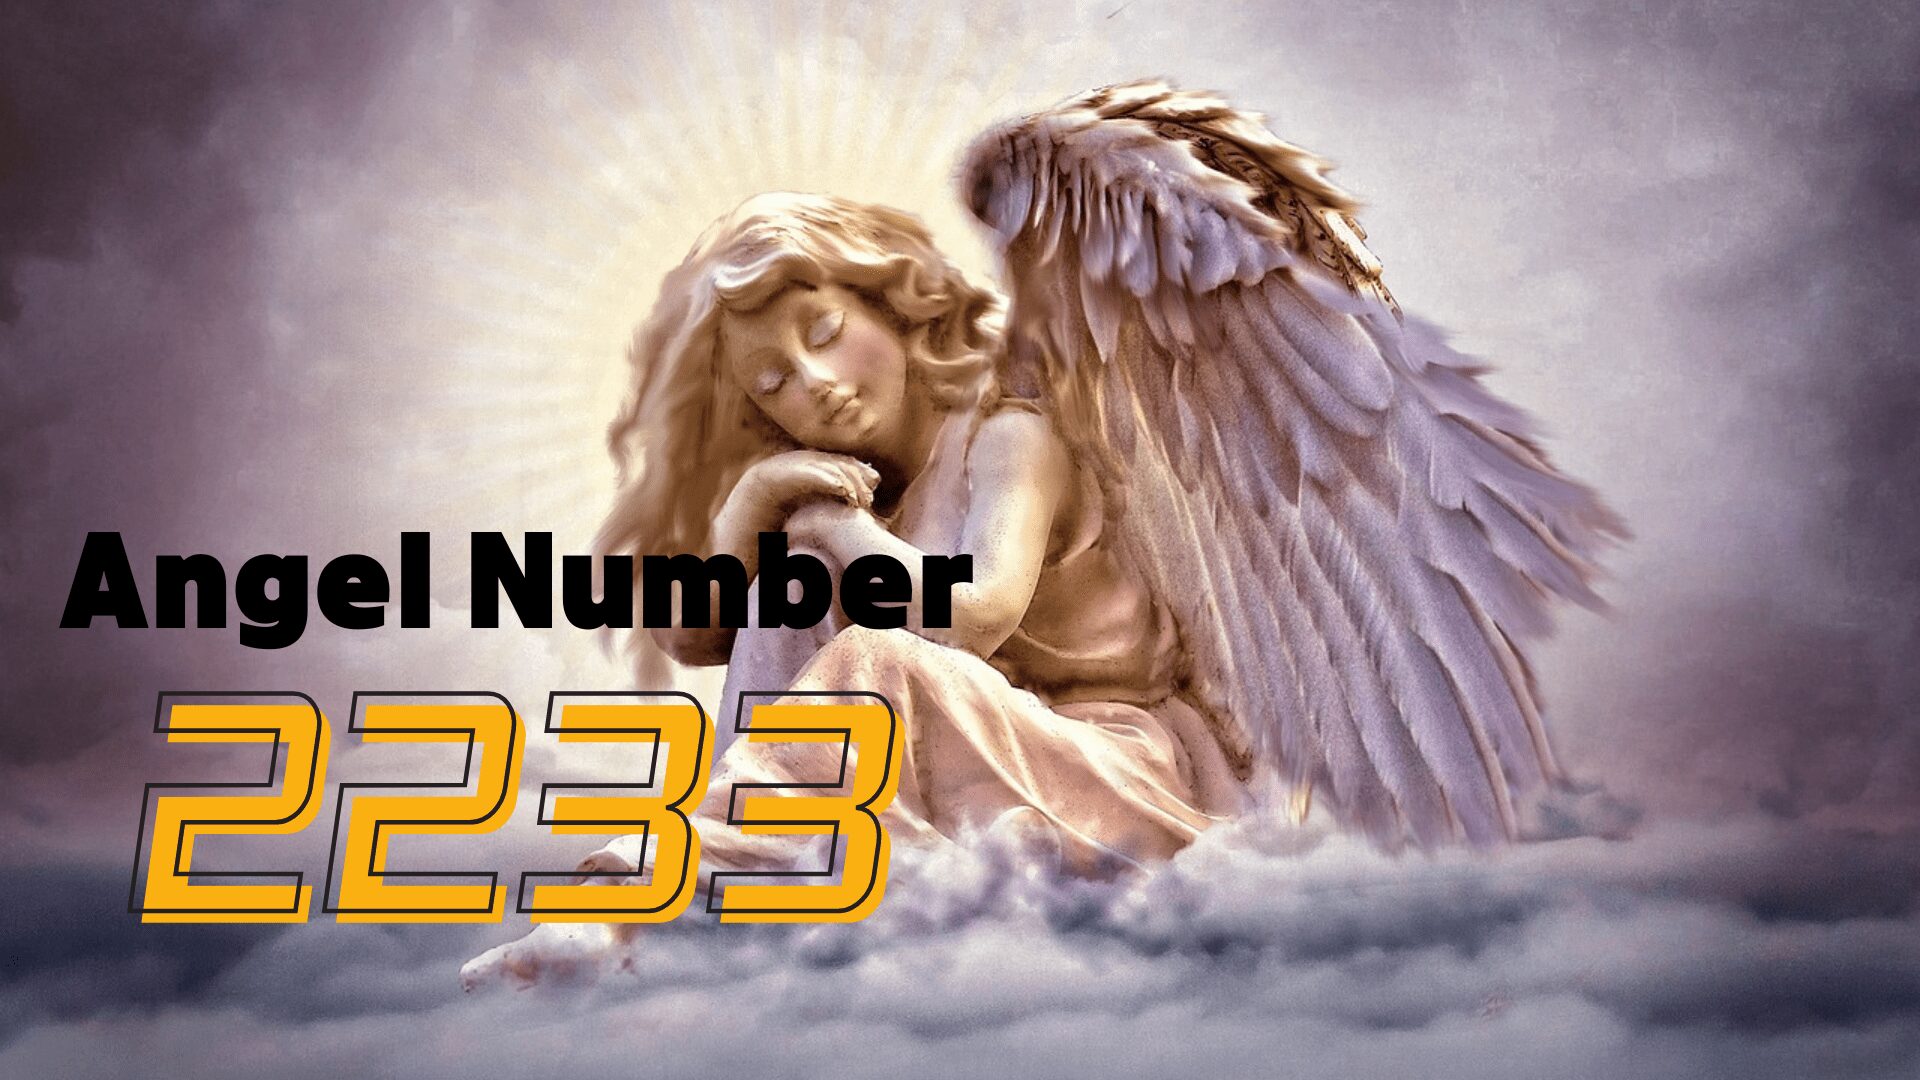 Angel Number 2233 For Love